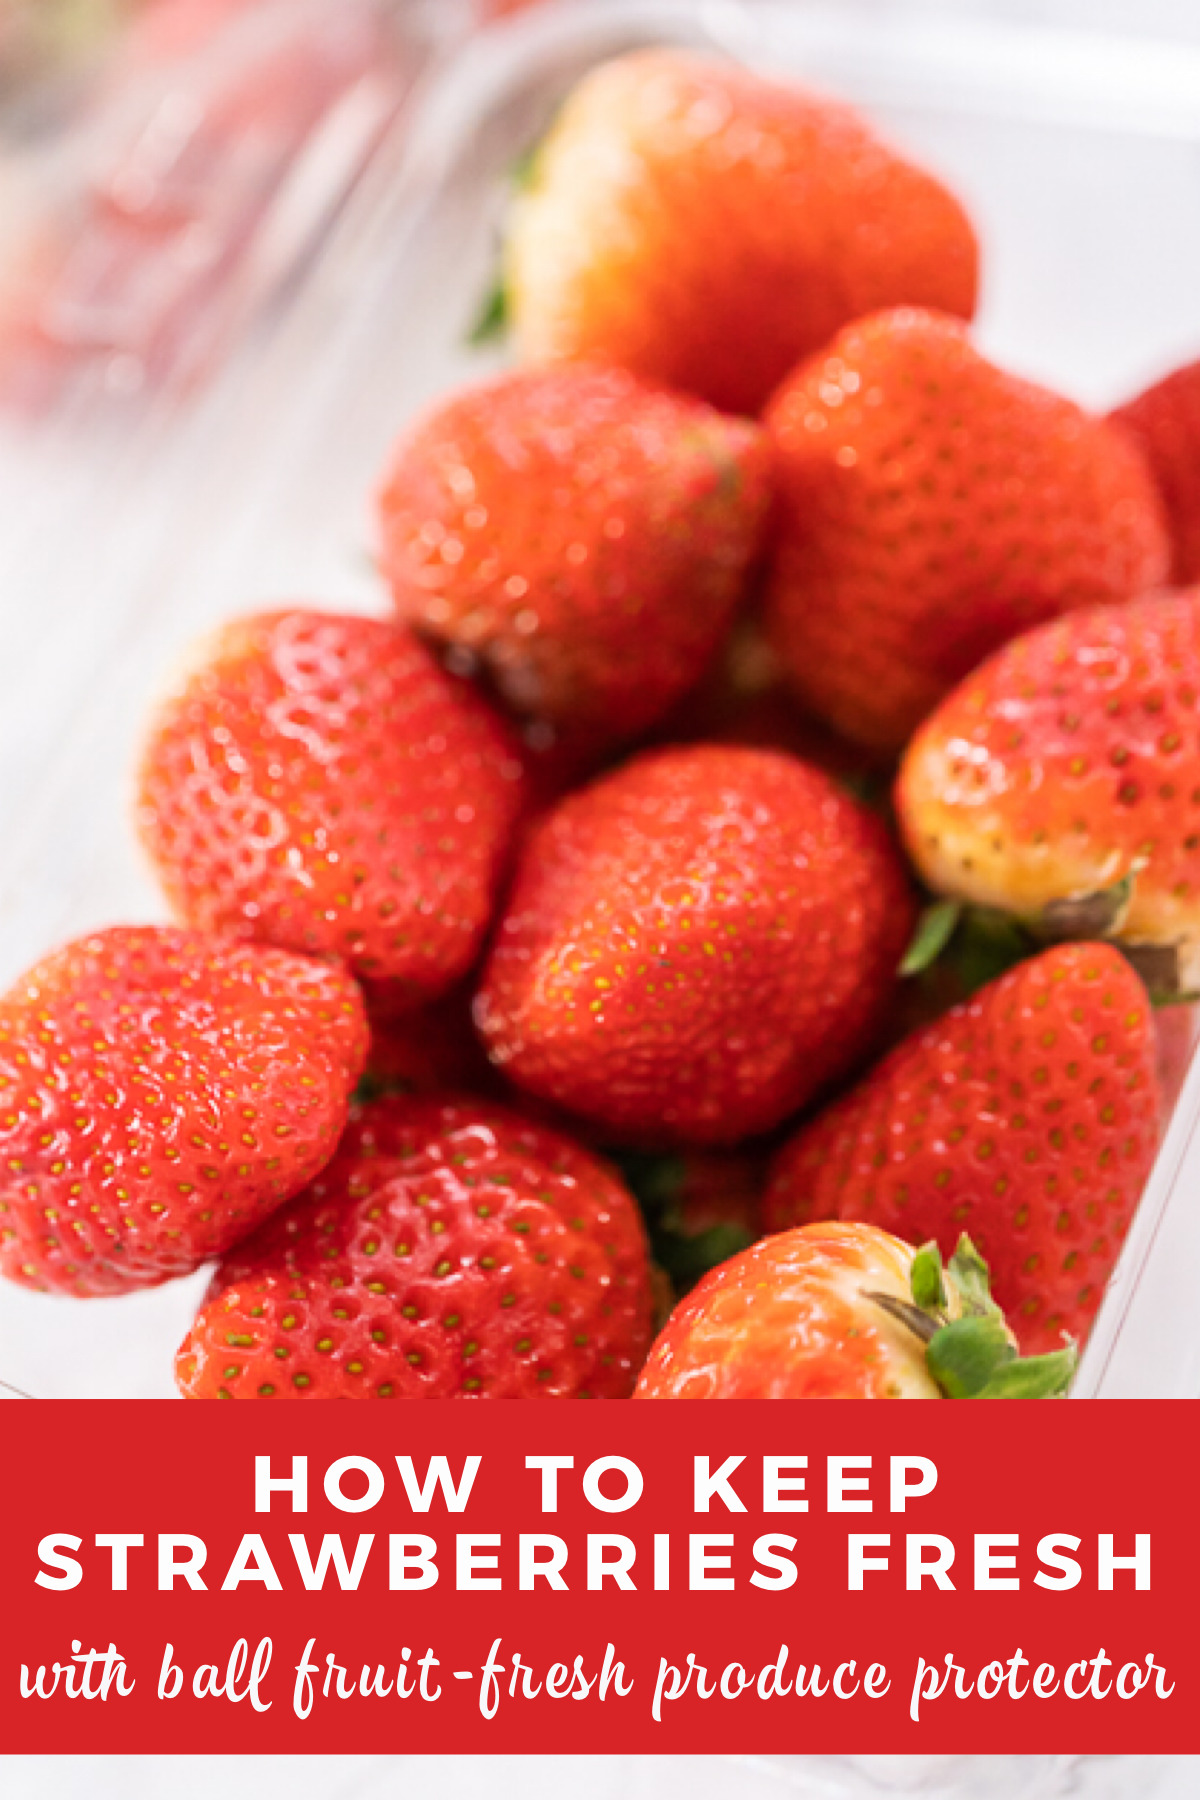 How to keep strawberries fresh with Ball fruit-fresh produce protector